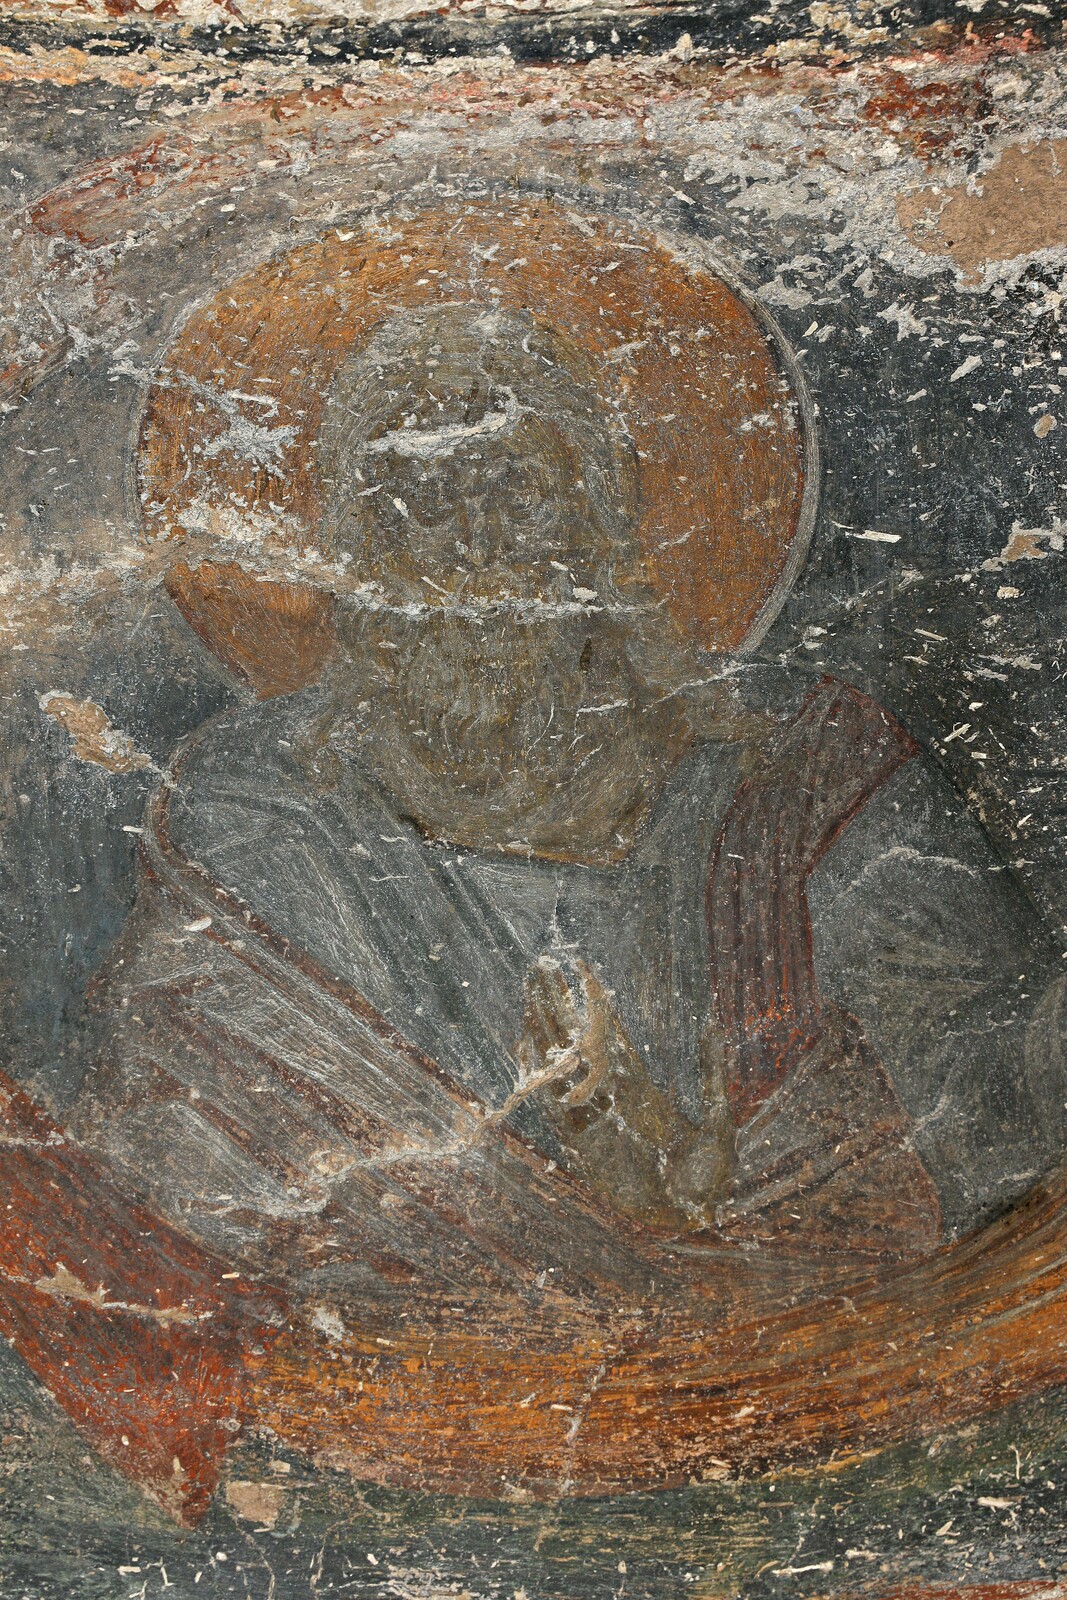 Forefathers of Christ, detail